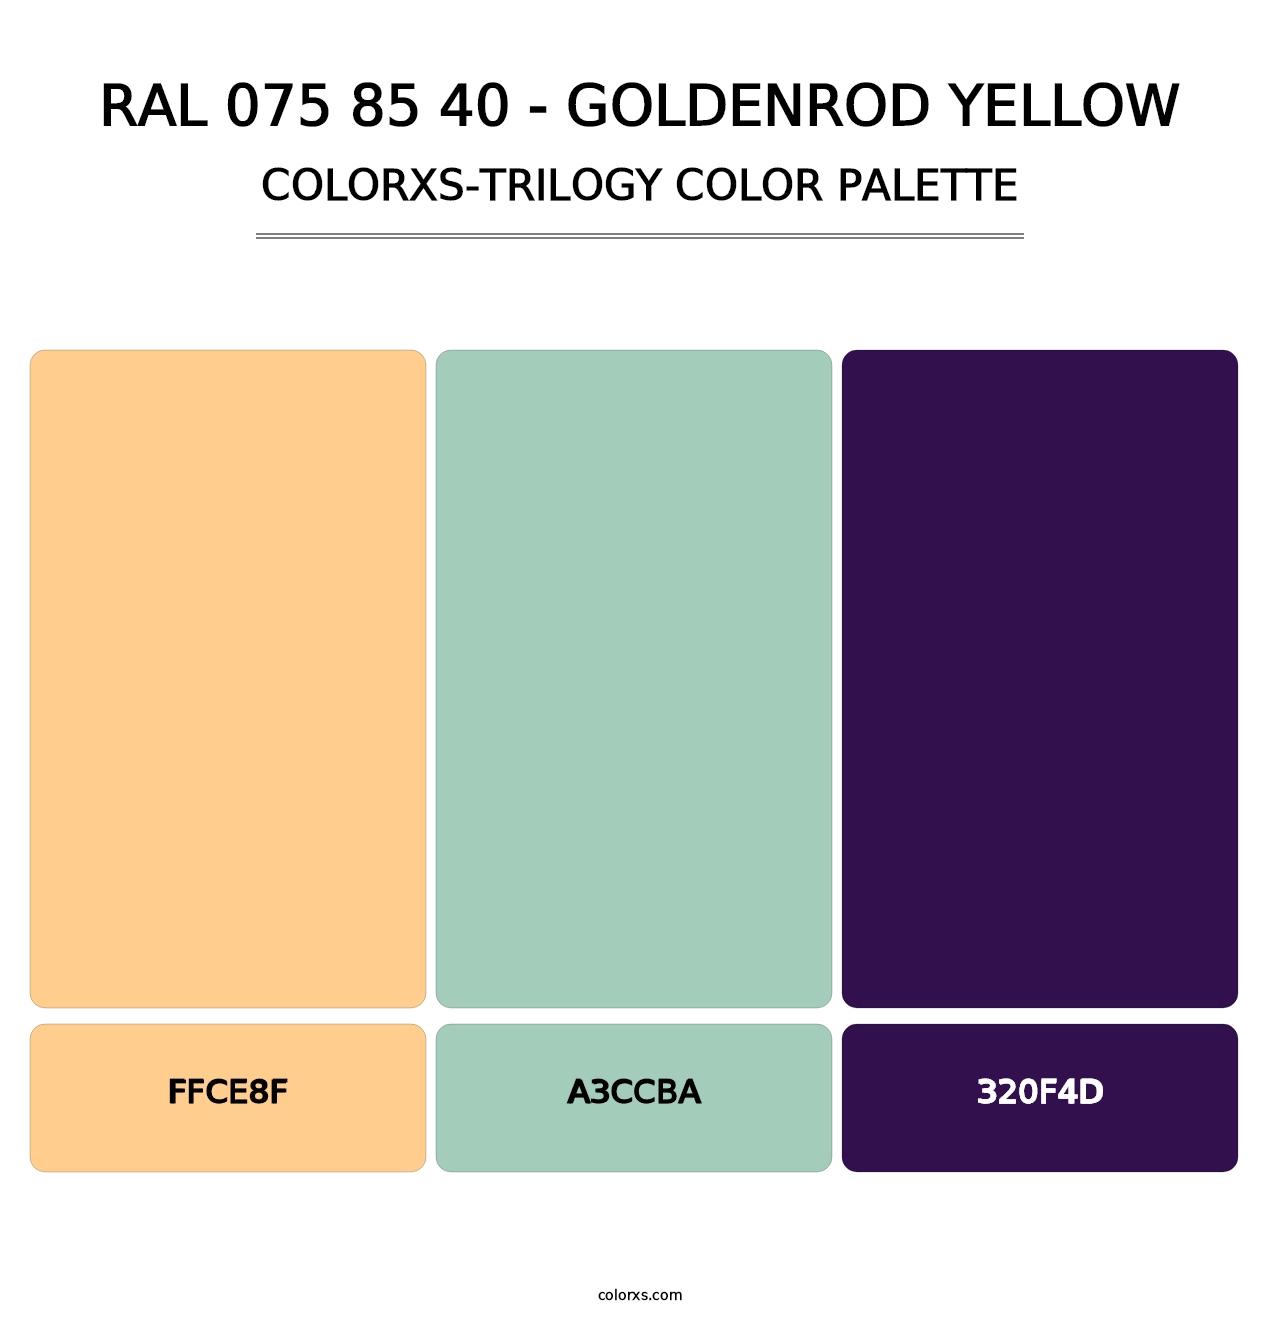 RAL 075 85 40 - Goldenrod Yellow - Colorxs Trilogy Palette